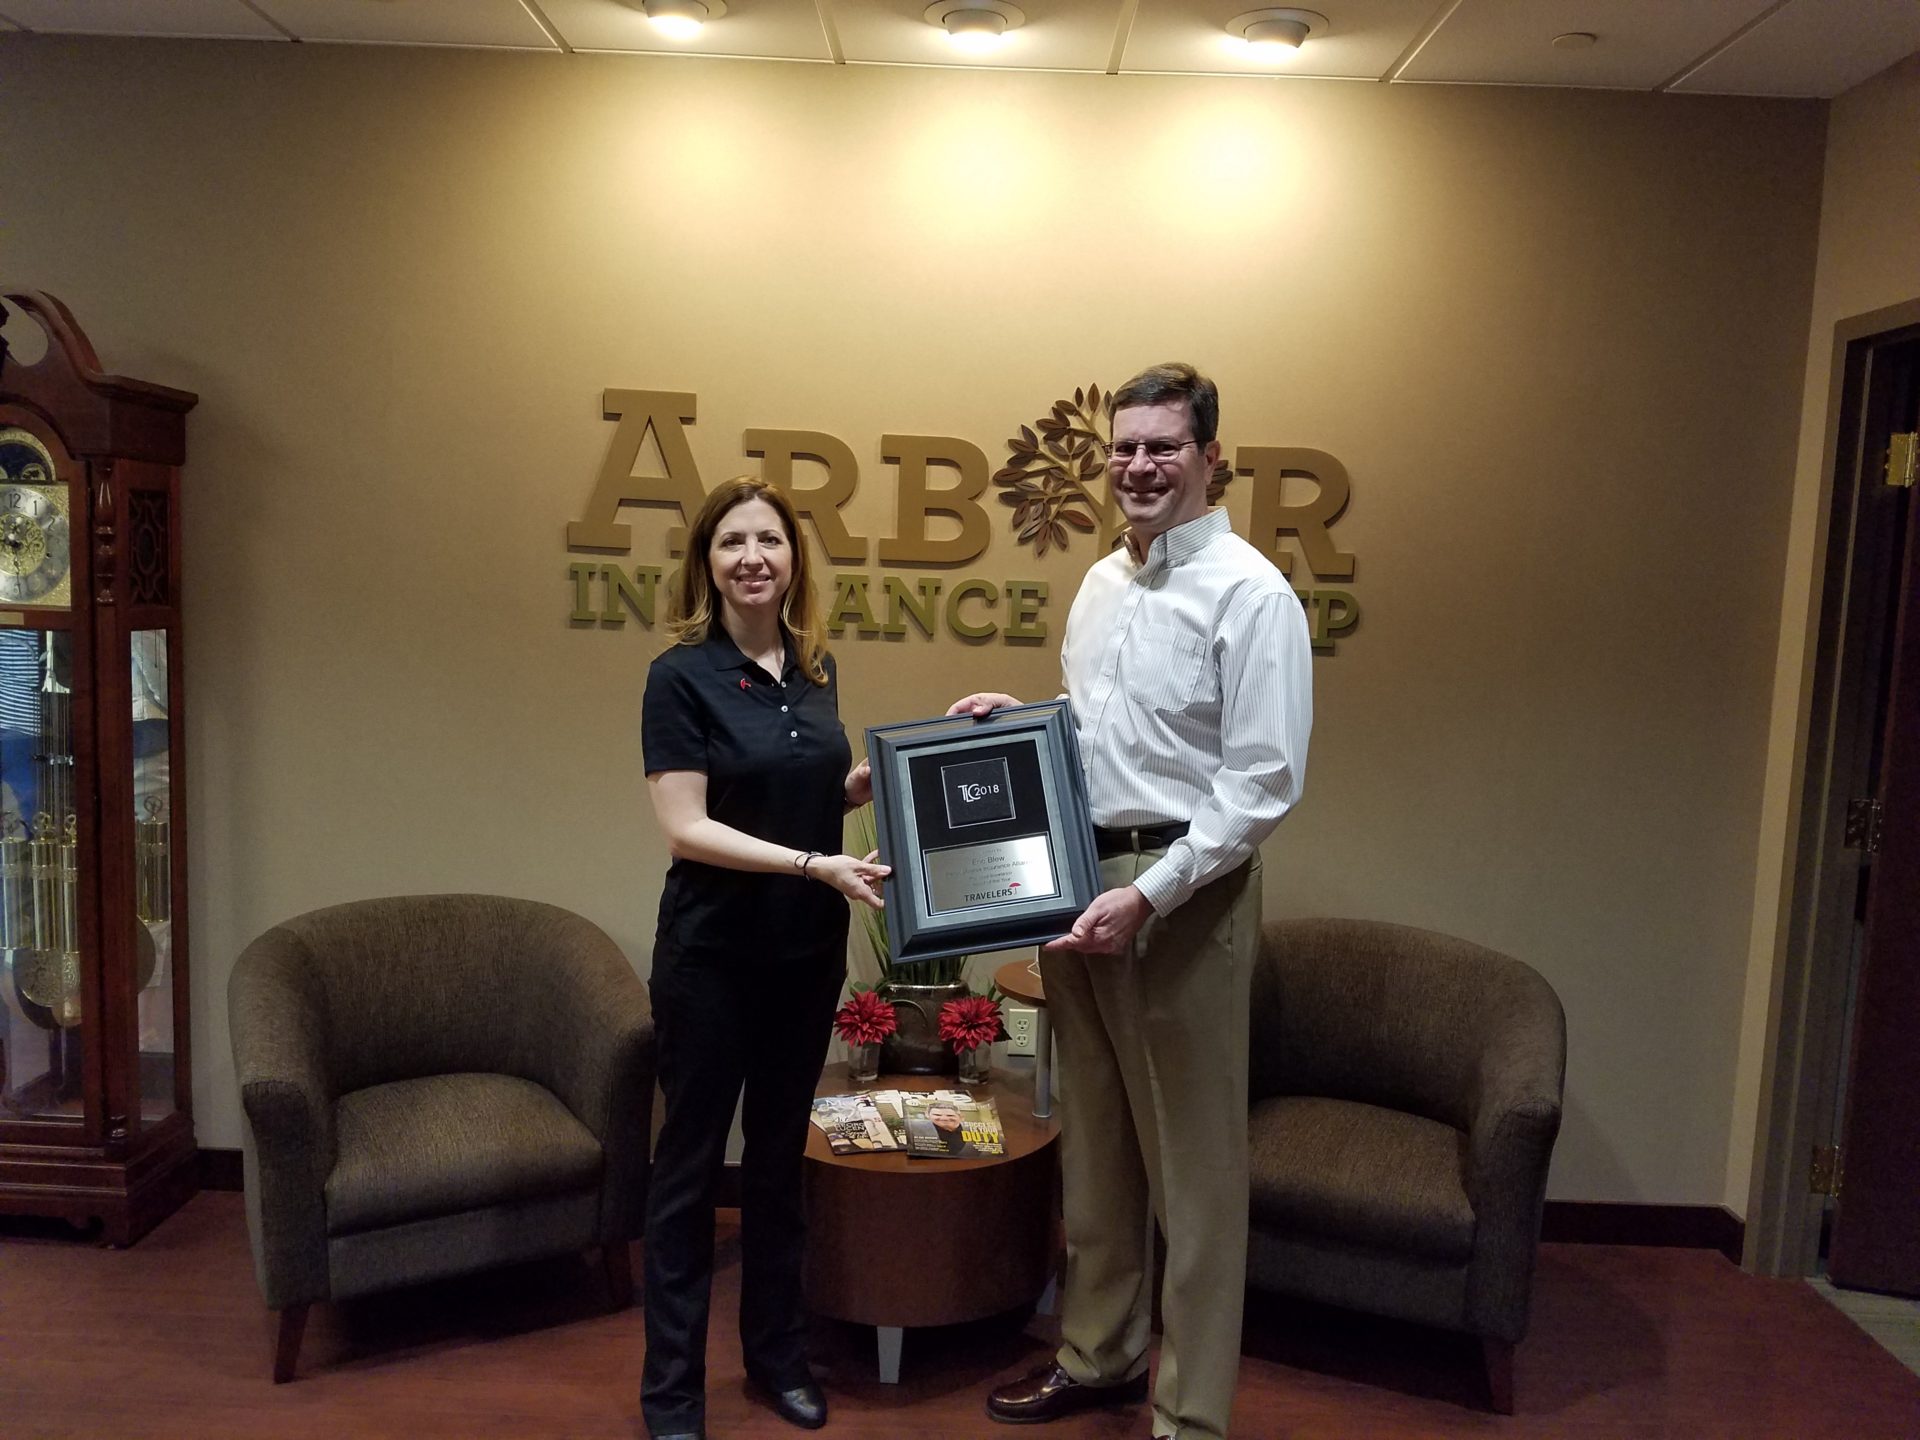 Arbor’s Eric Blew is recognized as Personal Insurance Agent of the Year by Travelers